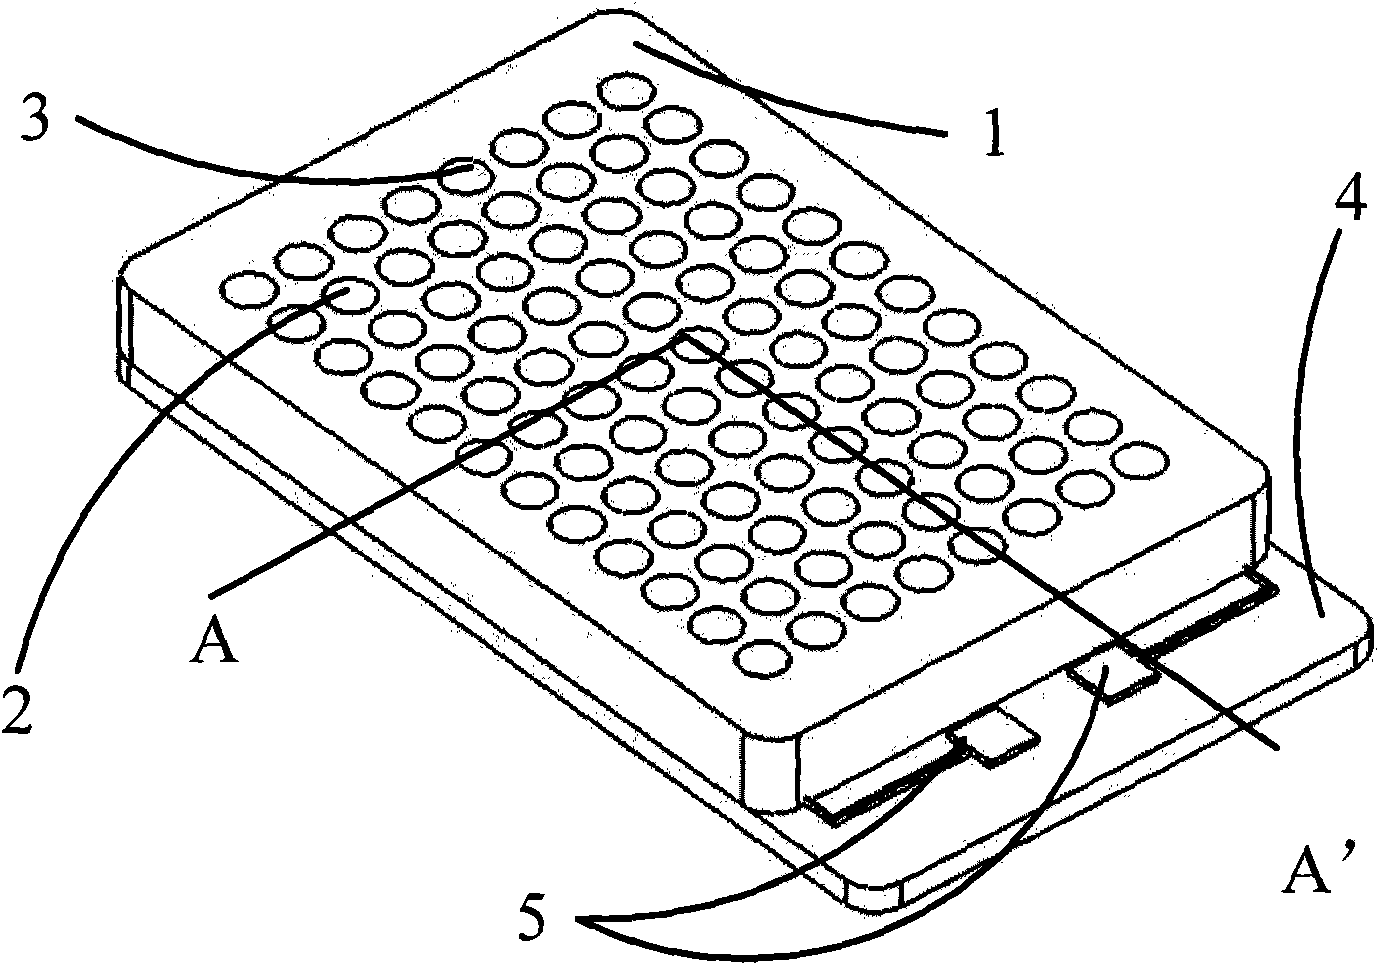 Electroporated chip and porous plate device base on electroporated chip